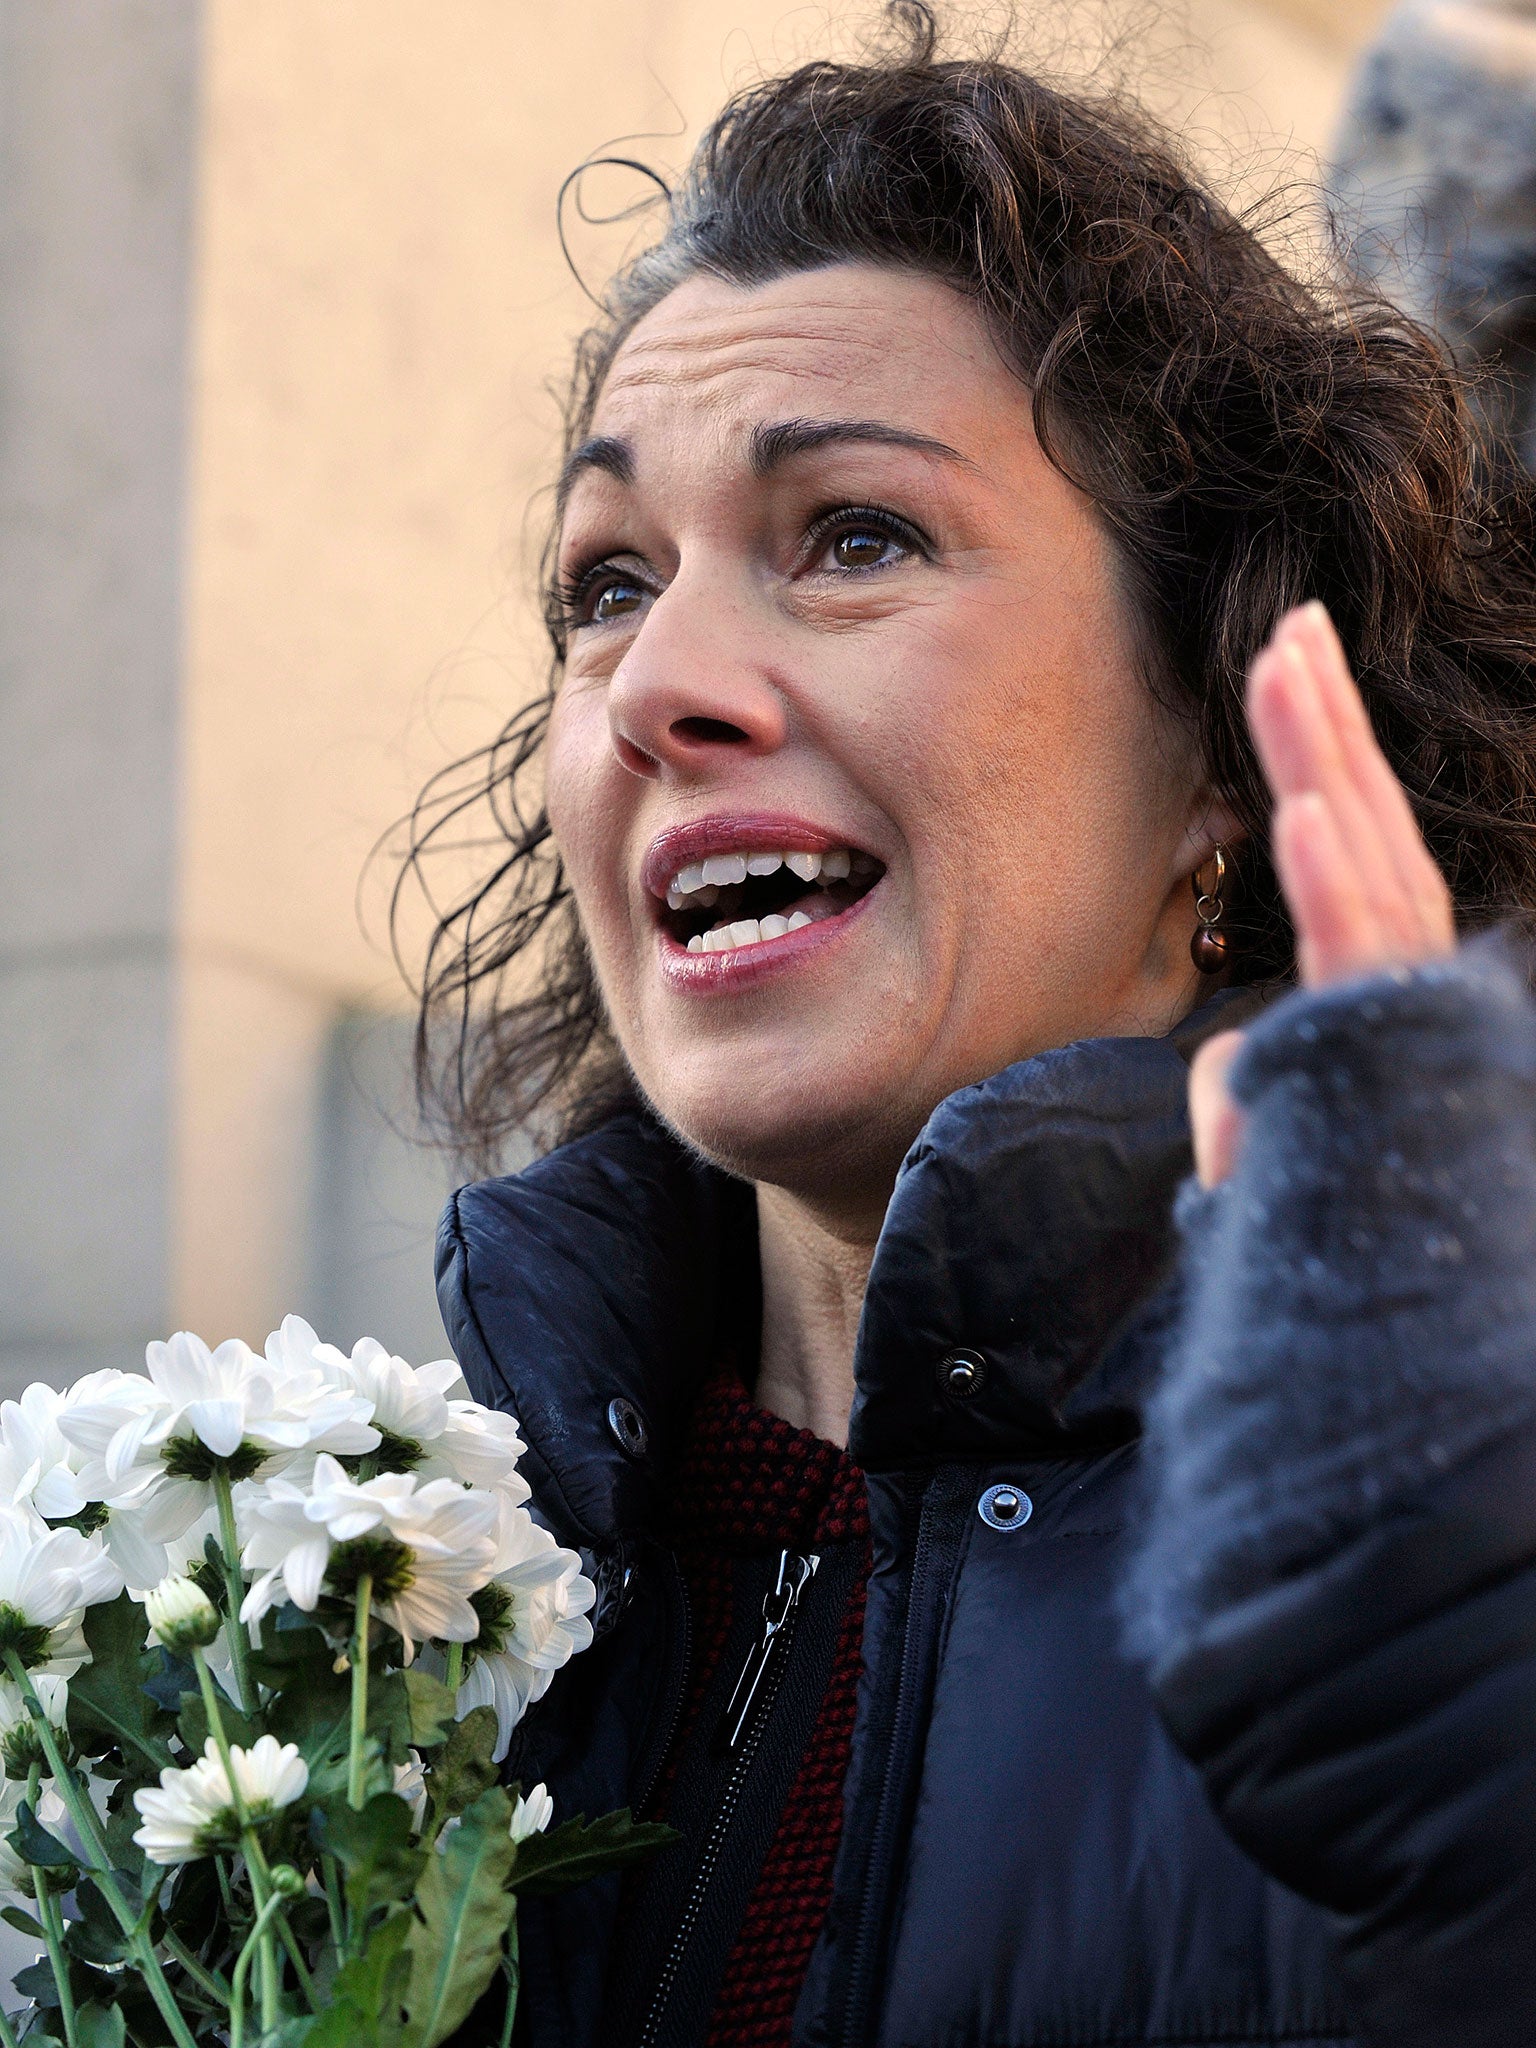 Rotherham's Labour MP Sarah Champion last week said she believes the figures in the Jay Report may be an under-estimate (Nick Ansell/PA Wire )